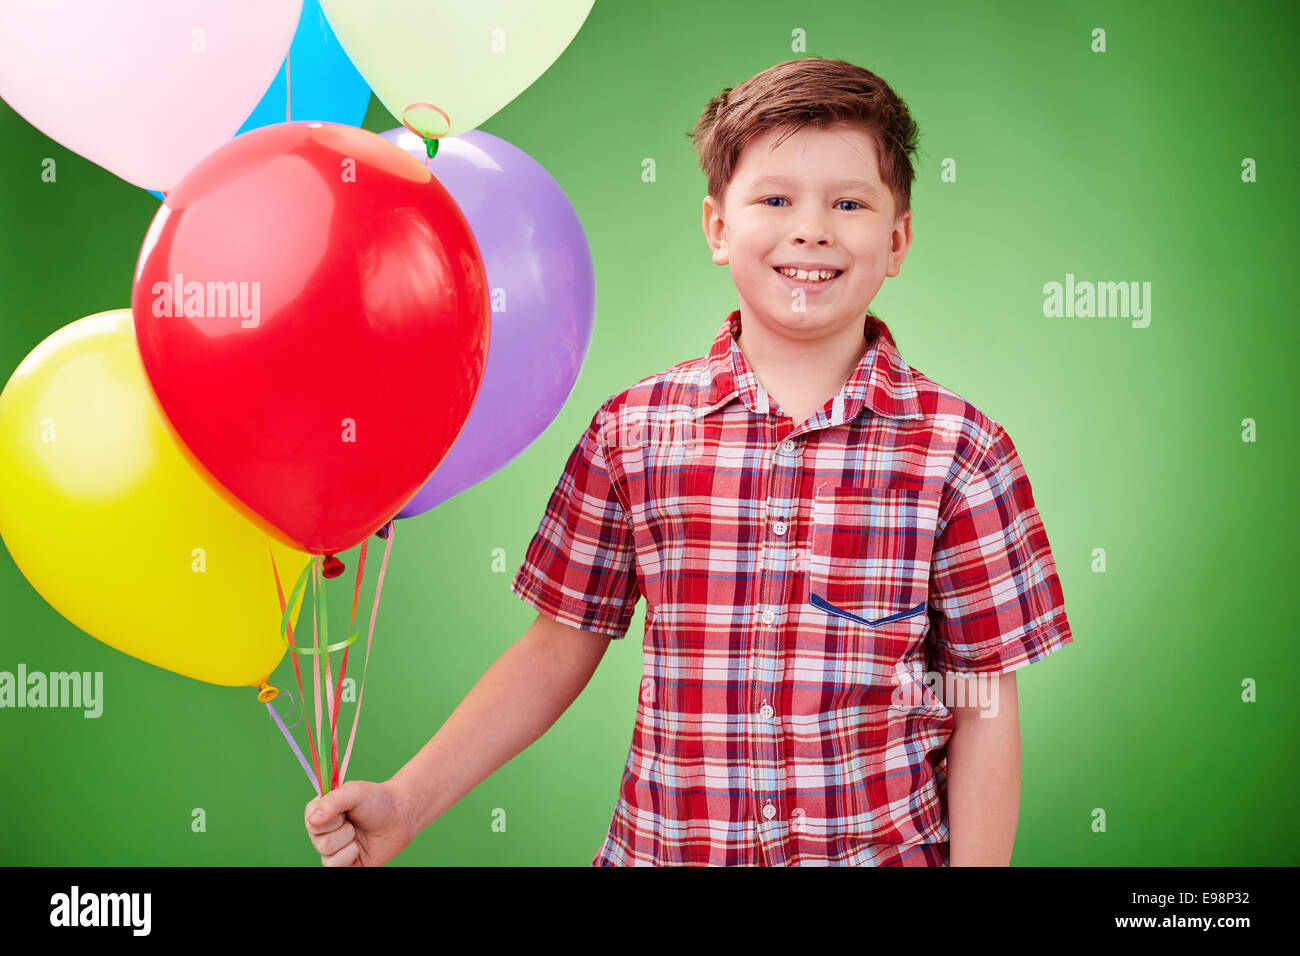 Smiling lad with balloons looking at camera in isolation Stock Photo